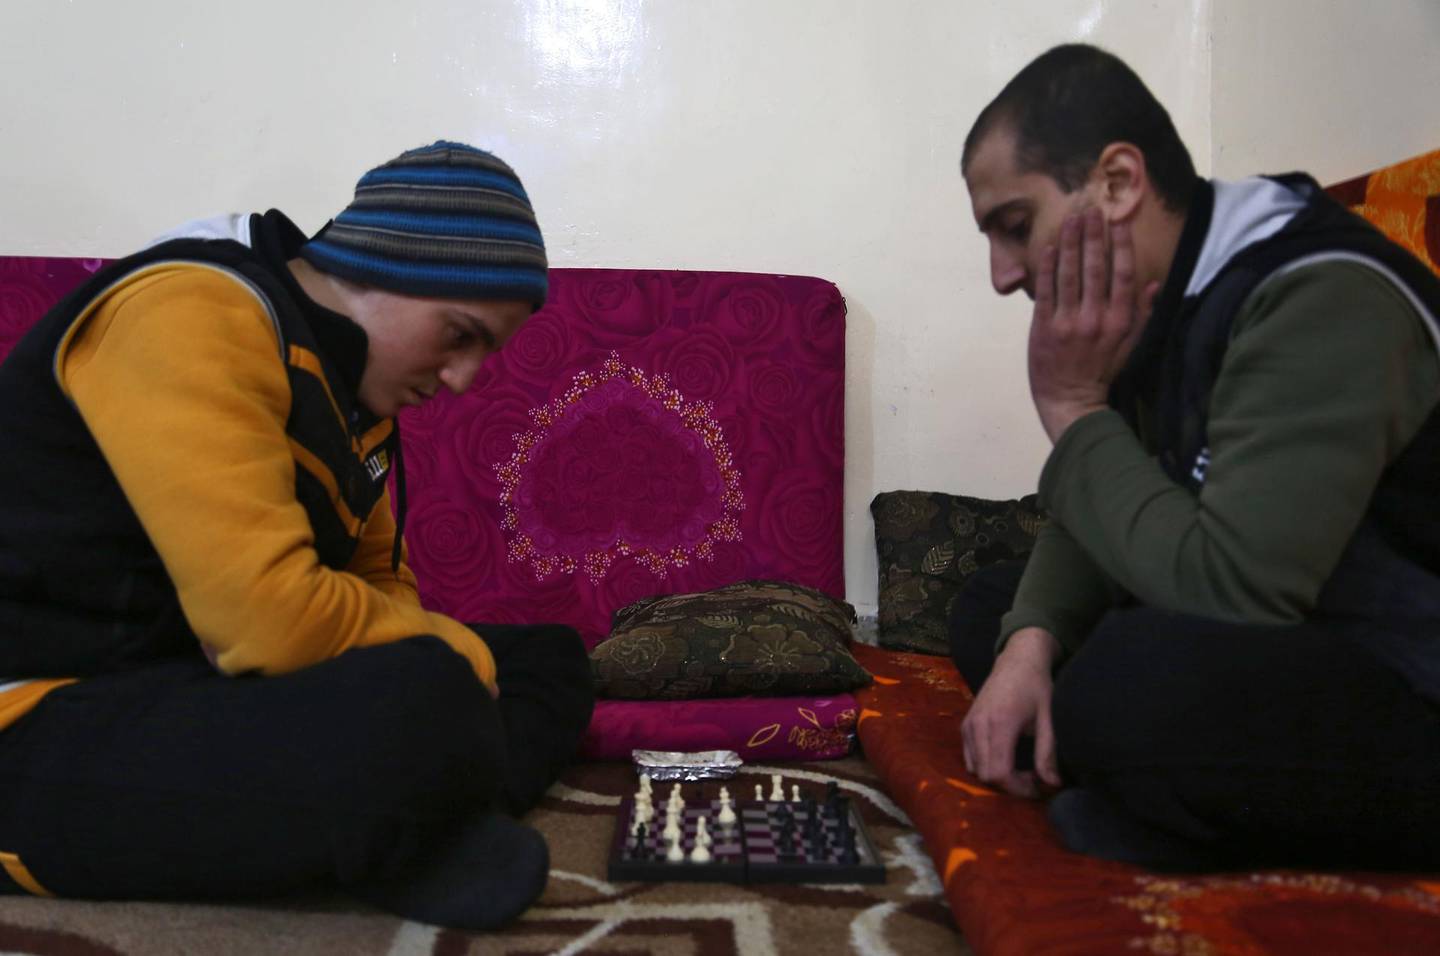 Mohammed Haj Ahmad (R), 23, plays chess with his roommate at the Syrian Centre for Countering Extremist Ideology in the Syrian town of Marea, in the northern Aleppo district, on November 30, 2017.
In the rehabilitation centre in northern Syria, young men huddle over an innocuous game of chess and some cigarettes -- activities they once brutally suppressed as Islamic State group jihadists.  / AFP PHOTO / Nazeer al-Khatib